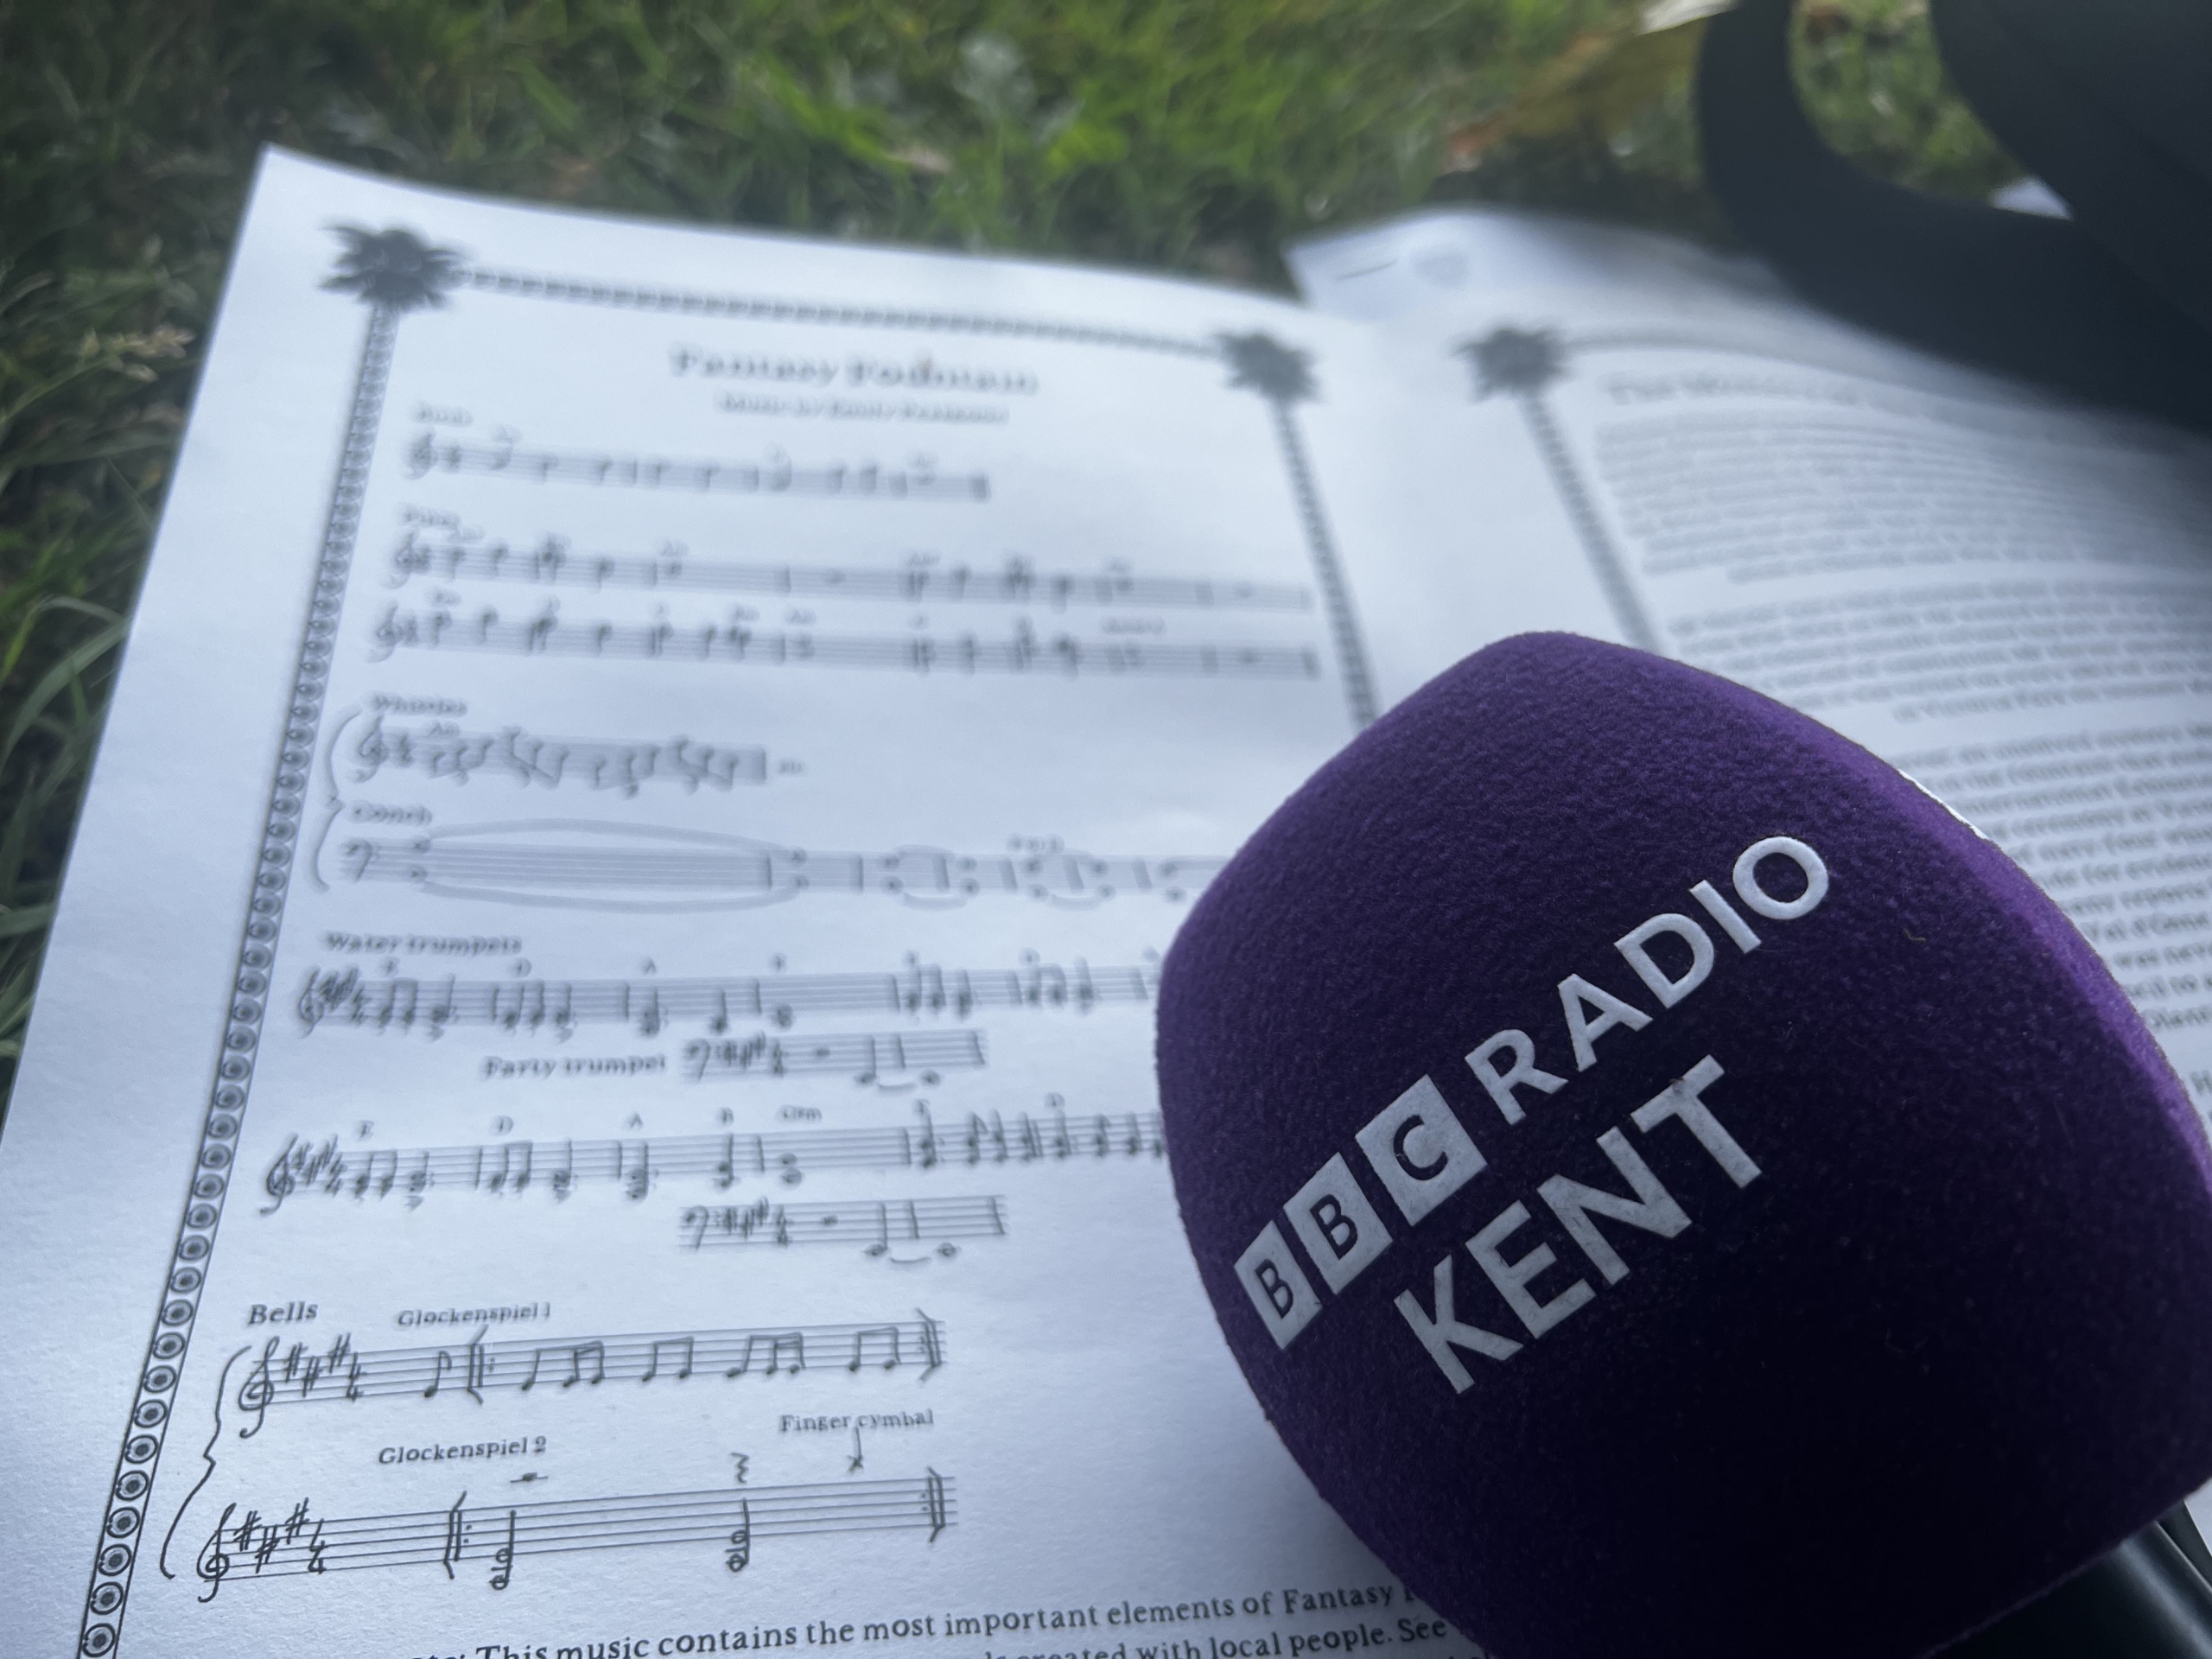 This image shows the limited edition score of Fantasy Fountain. It is placed on the grass in Victoria Park, at the opening day in 2022, and a purple BBC Radio Kent microphone is placed over the top.